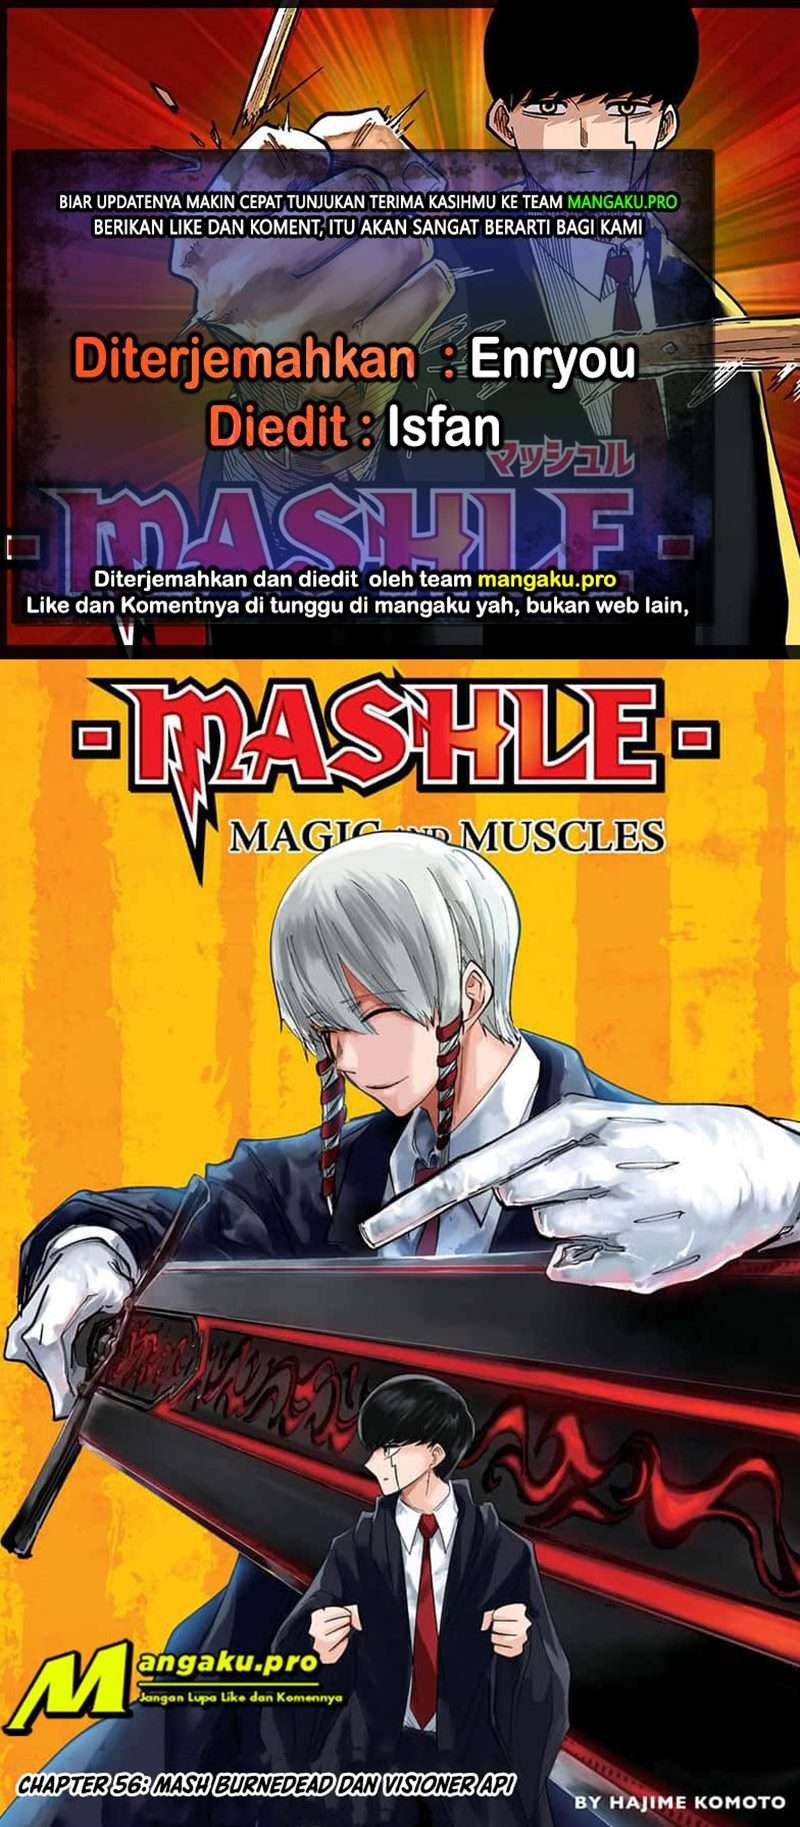 Mashle: Magic and Muscles Chapter 56